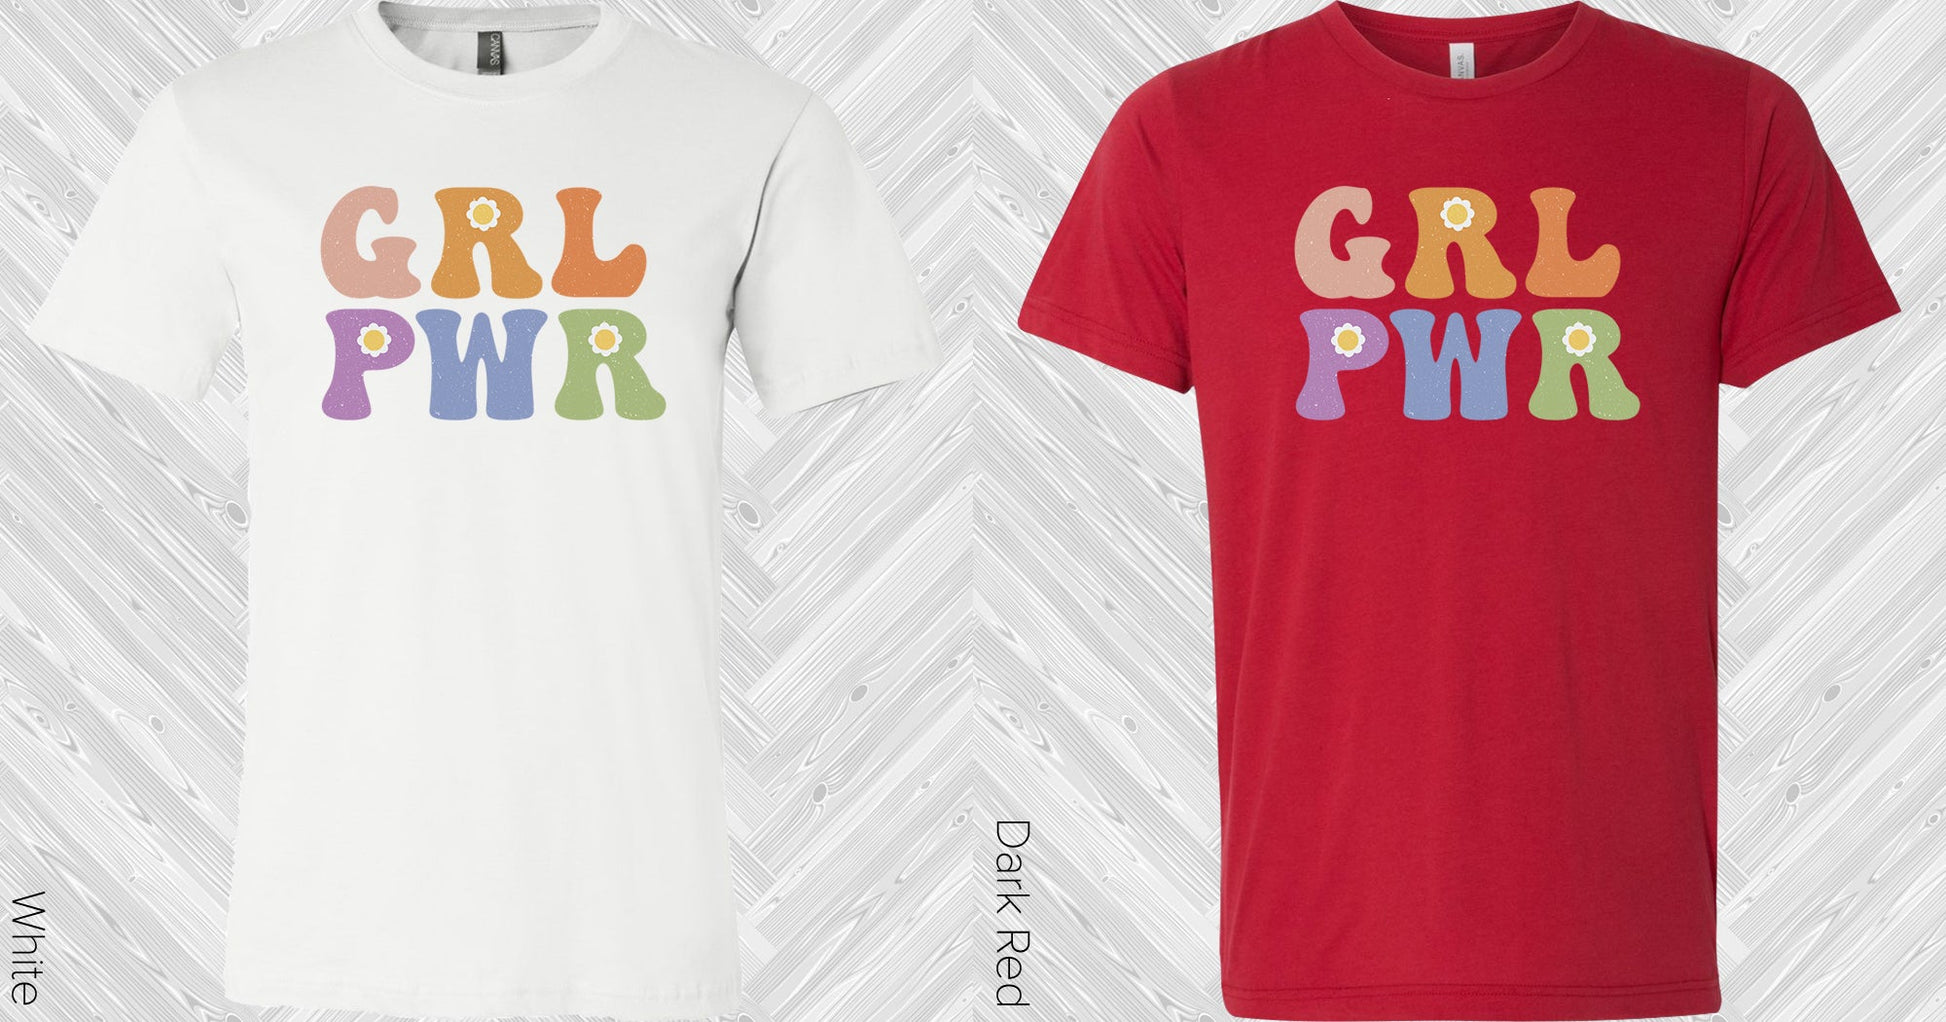 Grl Pwr Graphic Tee Graphic Tee